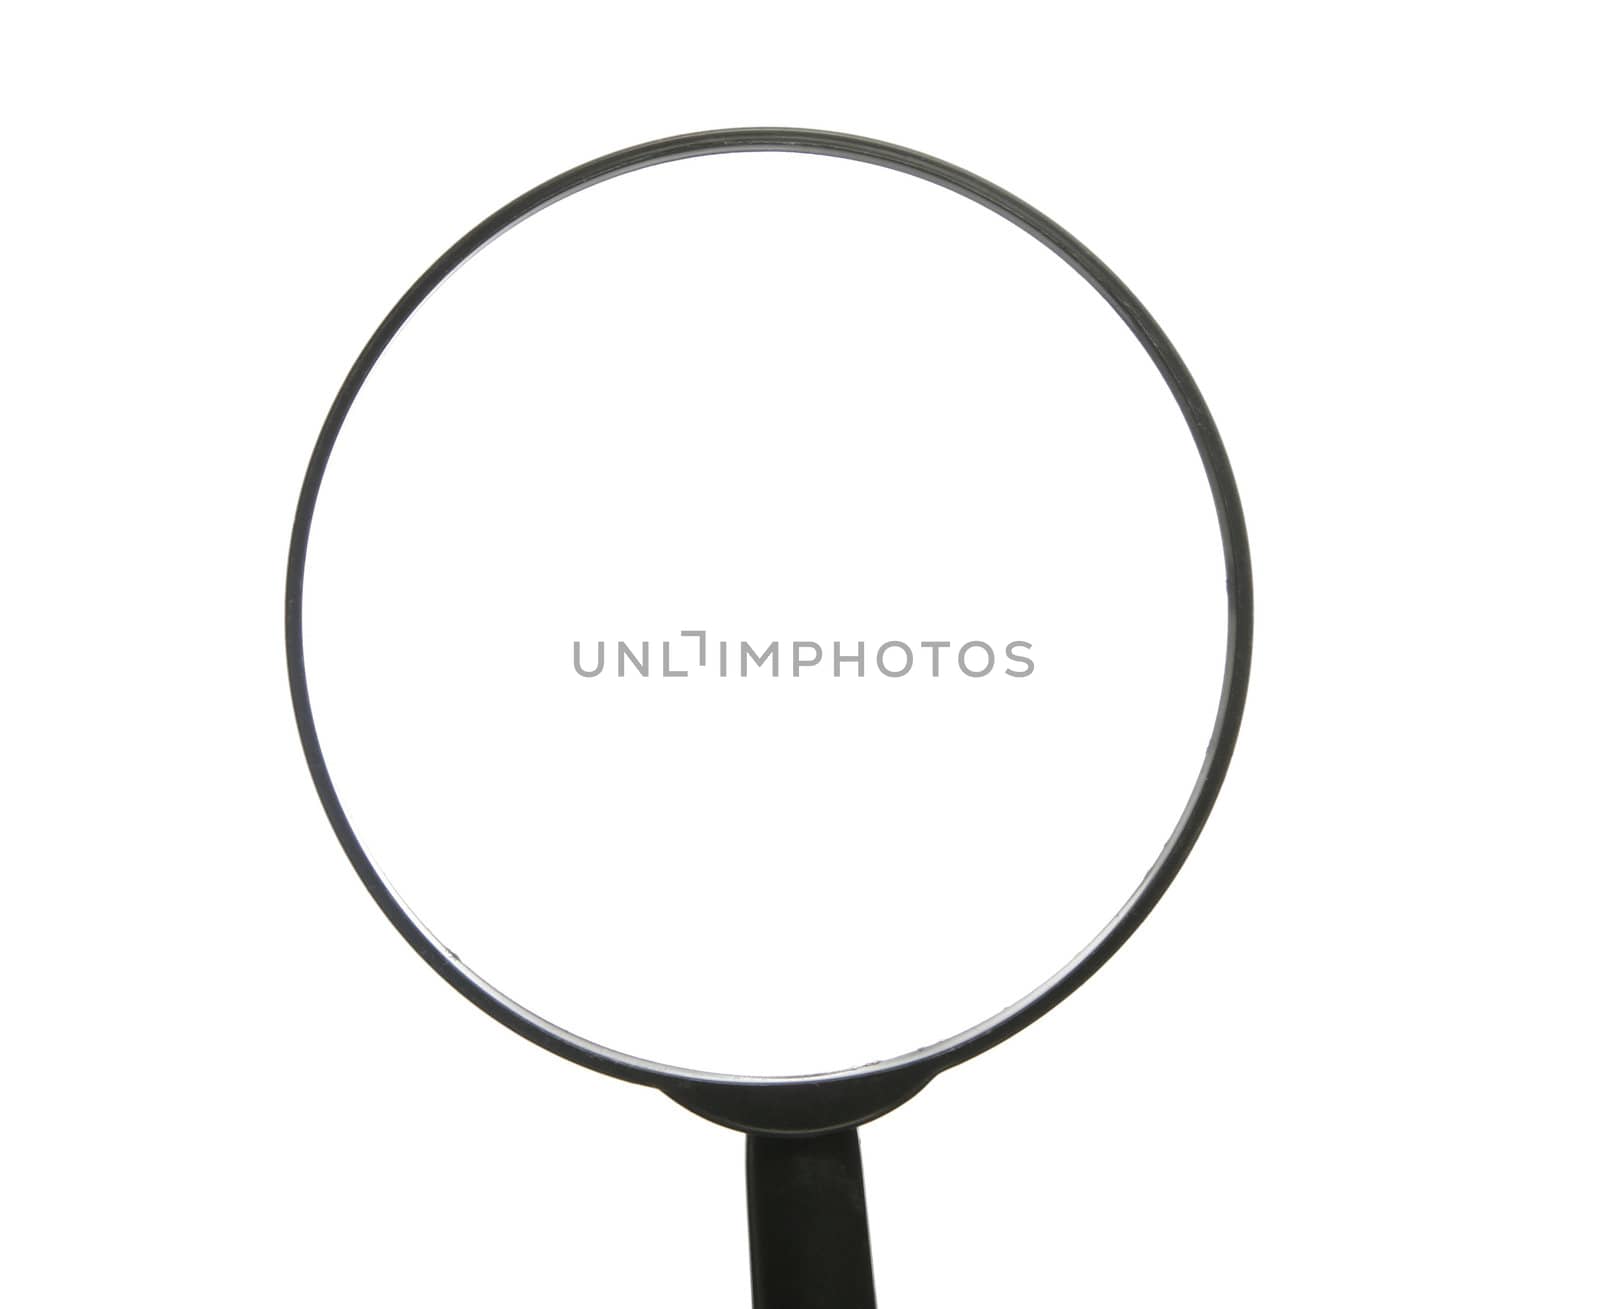 Top Of Simple Magnifying Glass Over White Background by thorsten